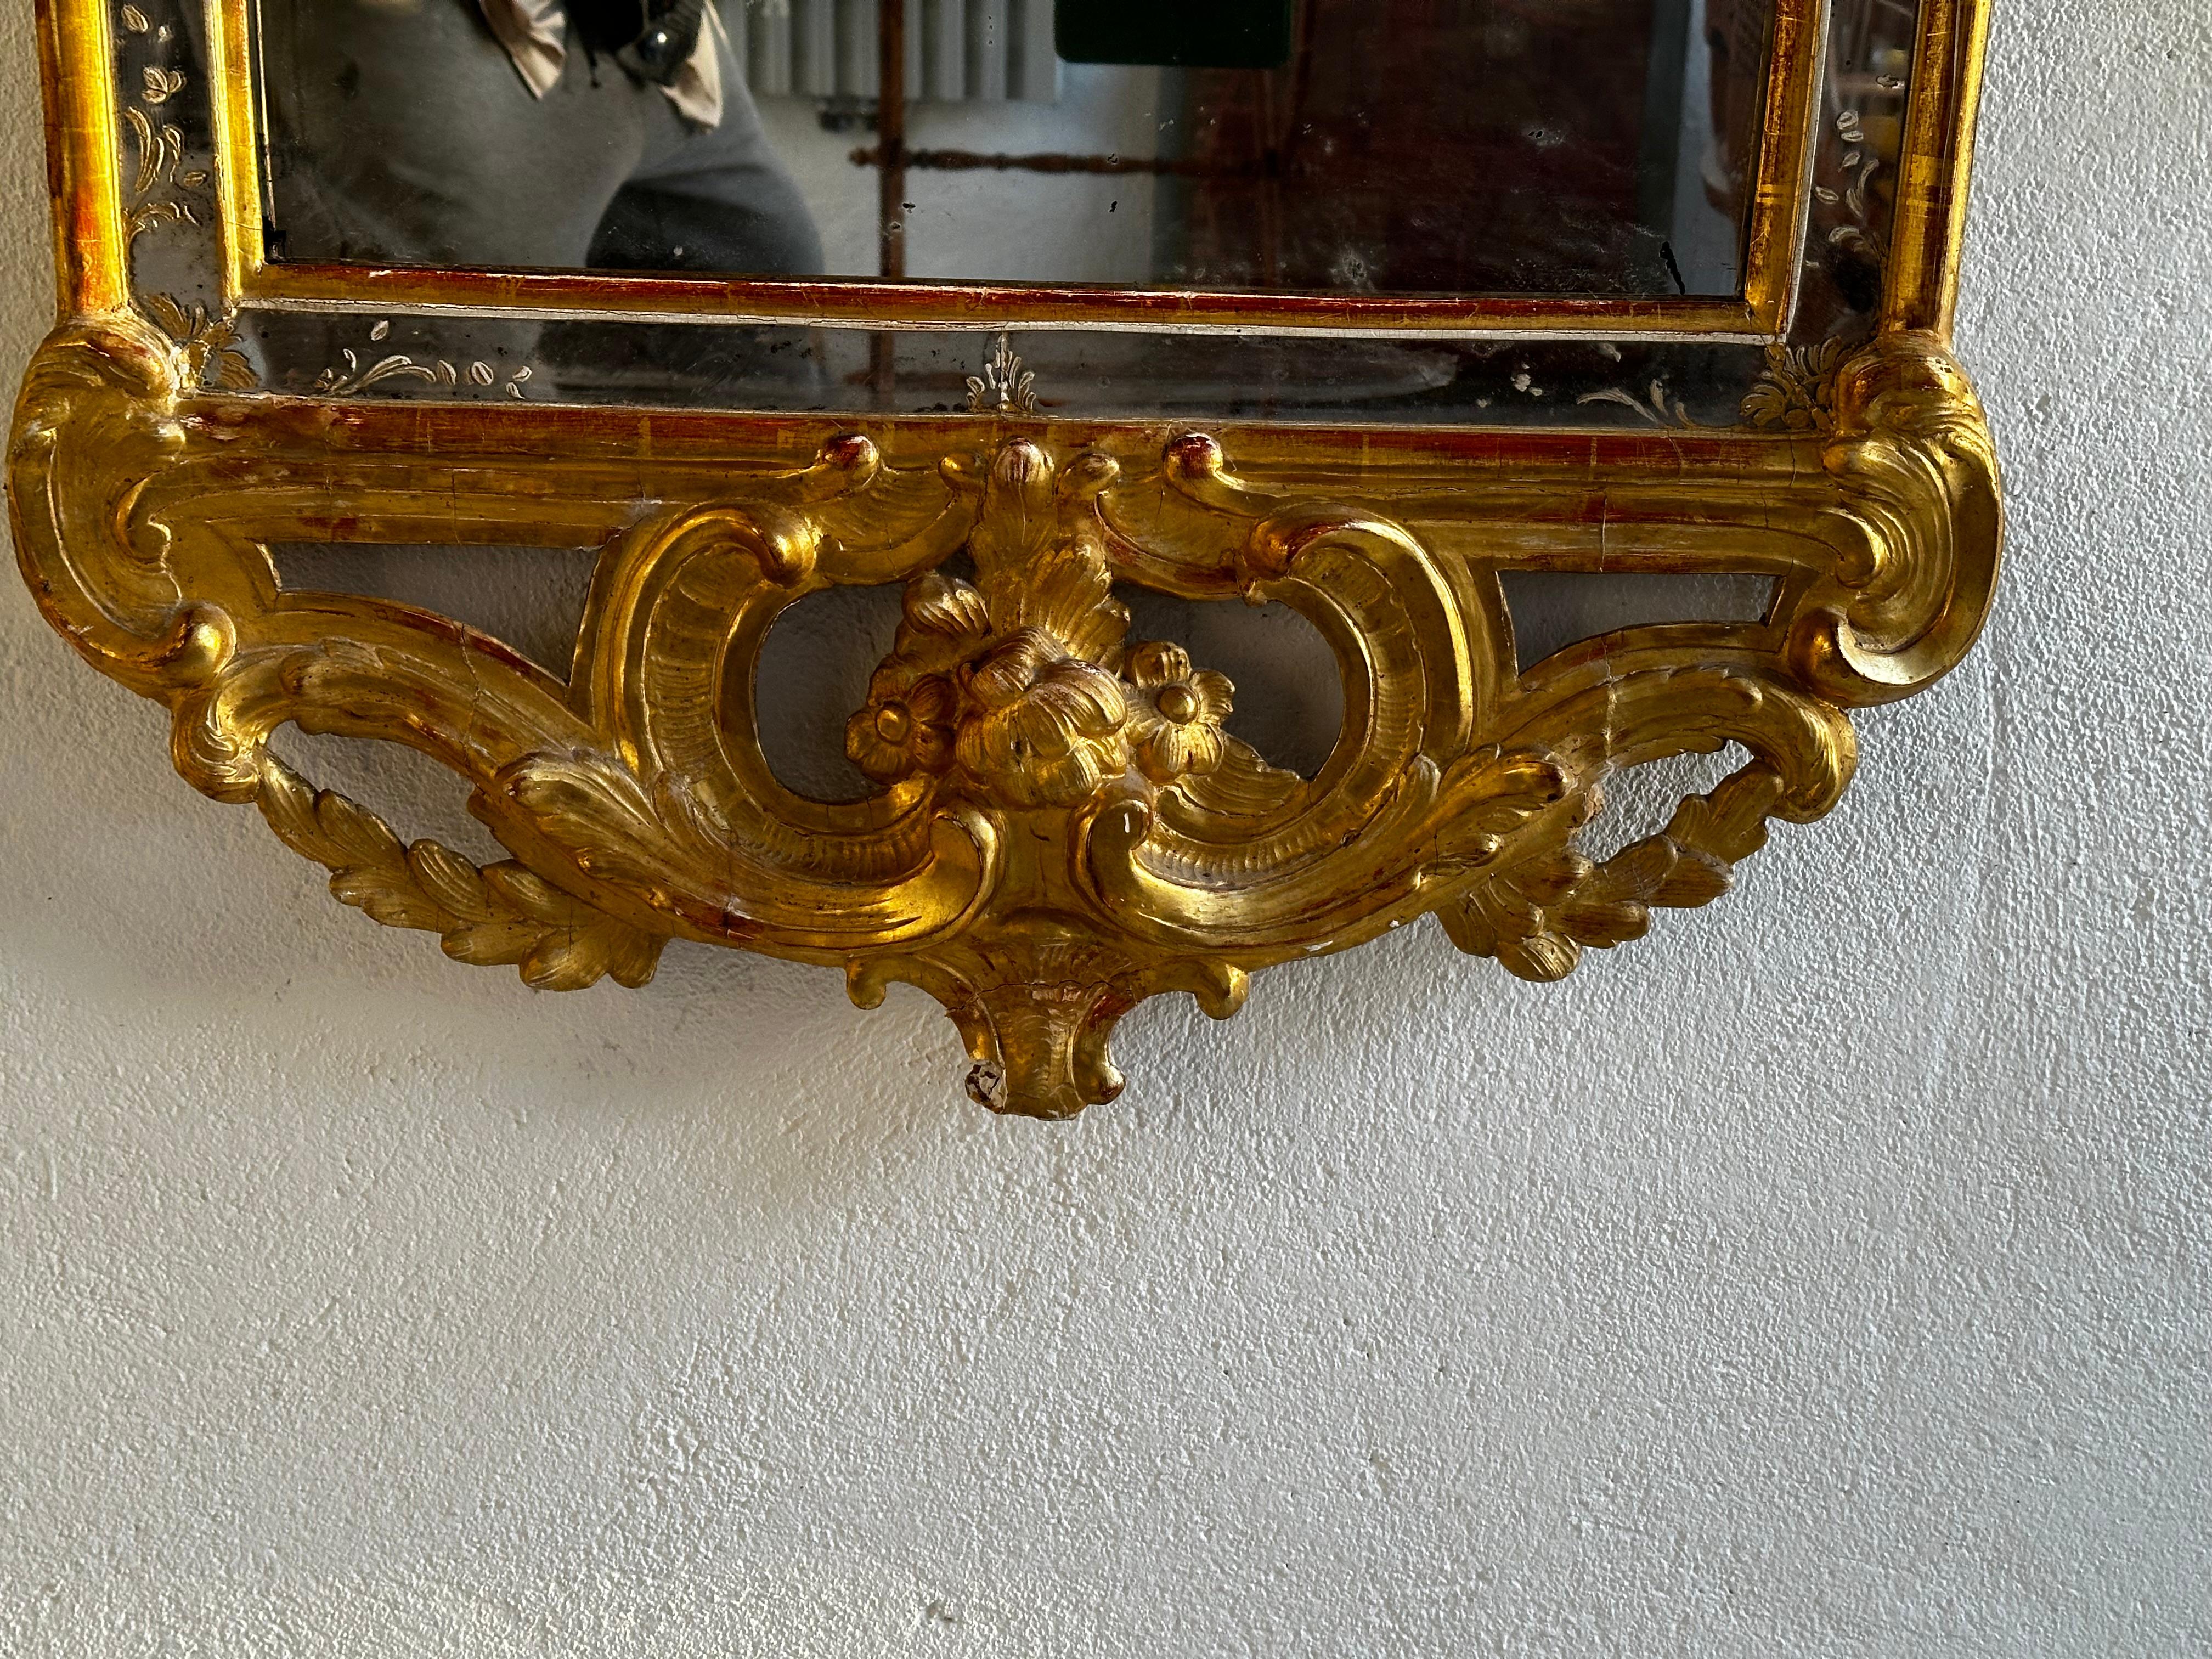 18th Century Full-Length mirror In Fair Condition For Sale In Stockholm, SE